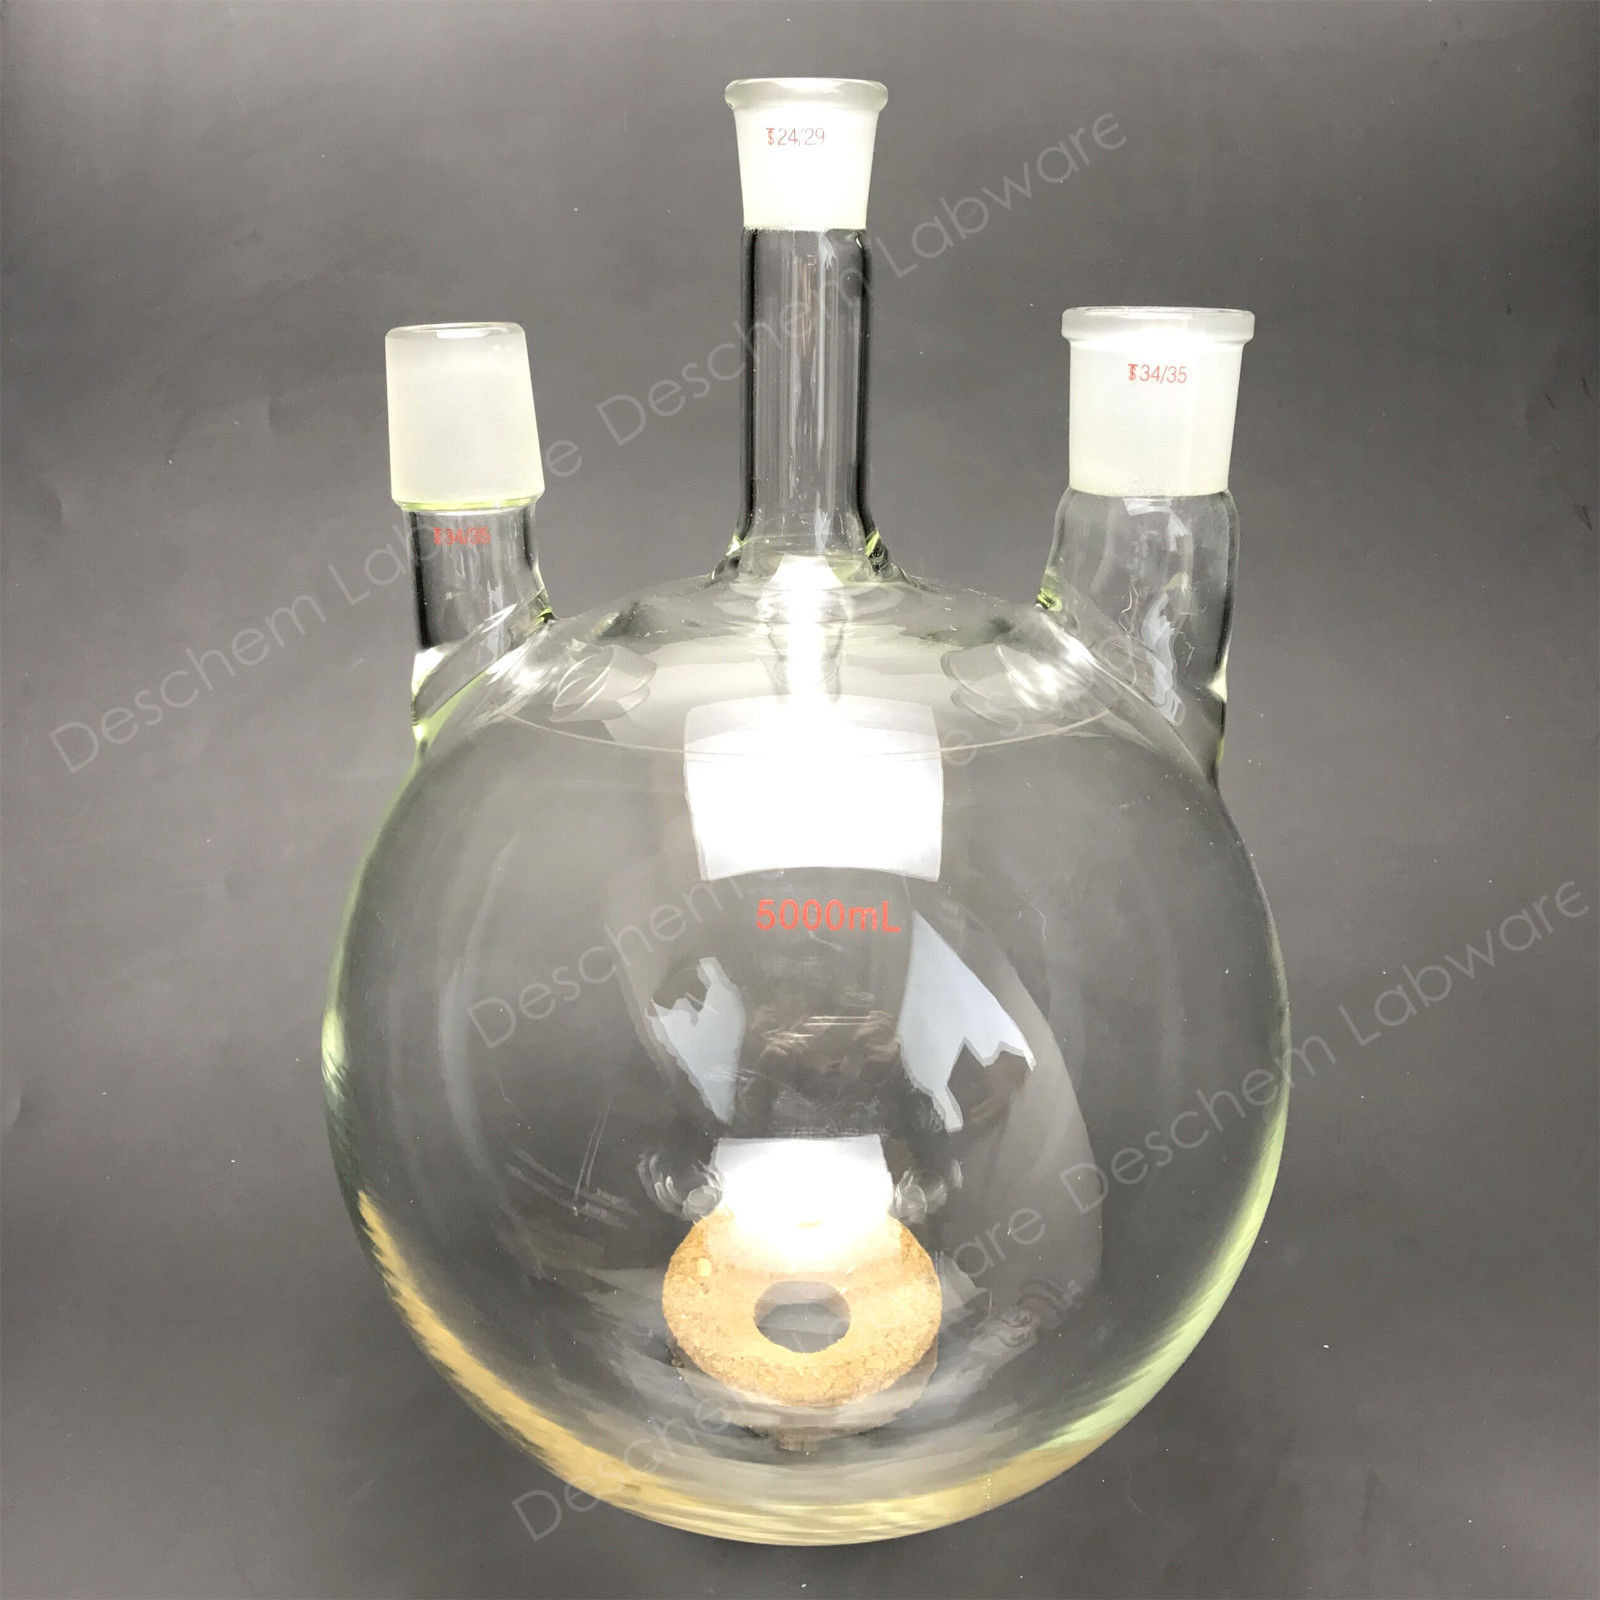 23 Nice Bottle Neck Glass Vase 2024 free download bottle neck glass vase of buy glass cone and get free shipping on aliexpress com pertaining to 5000ml 3 neck glass reaction flask centrel 24 29 socket 34 35 socket cone side